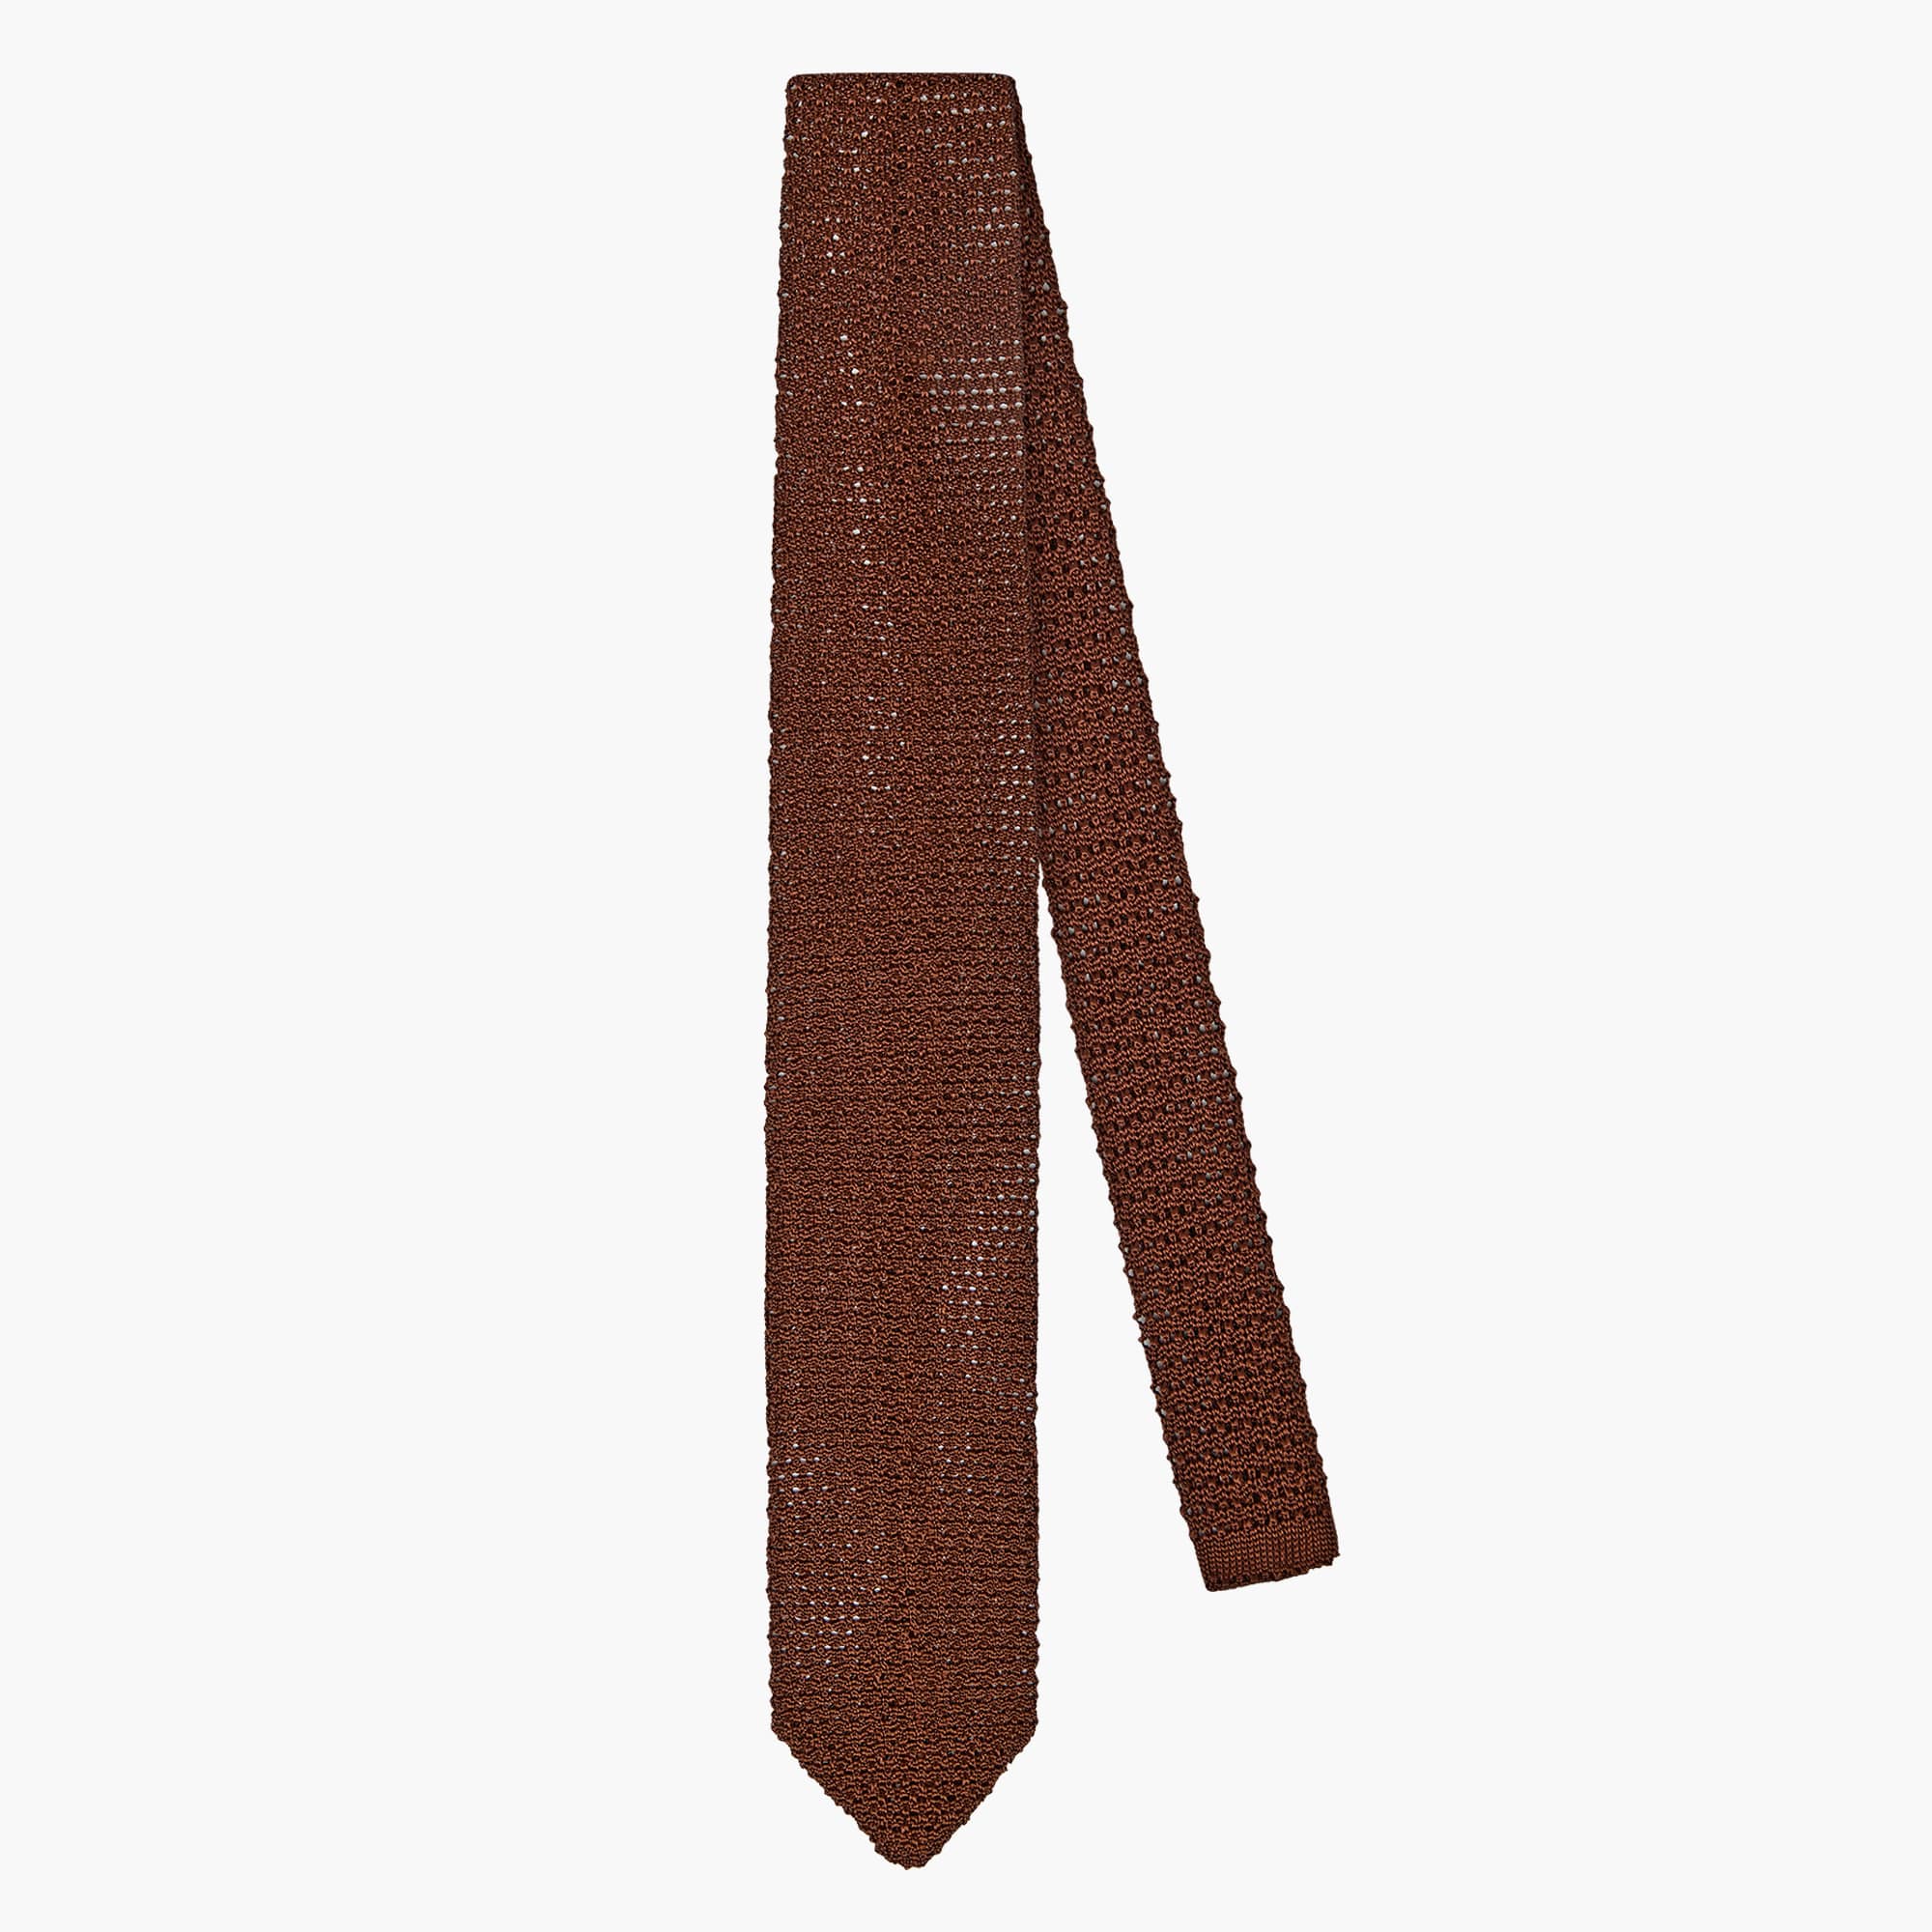 Knitted Solid Crochet Tie - Brown